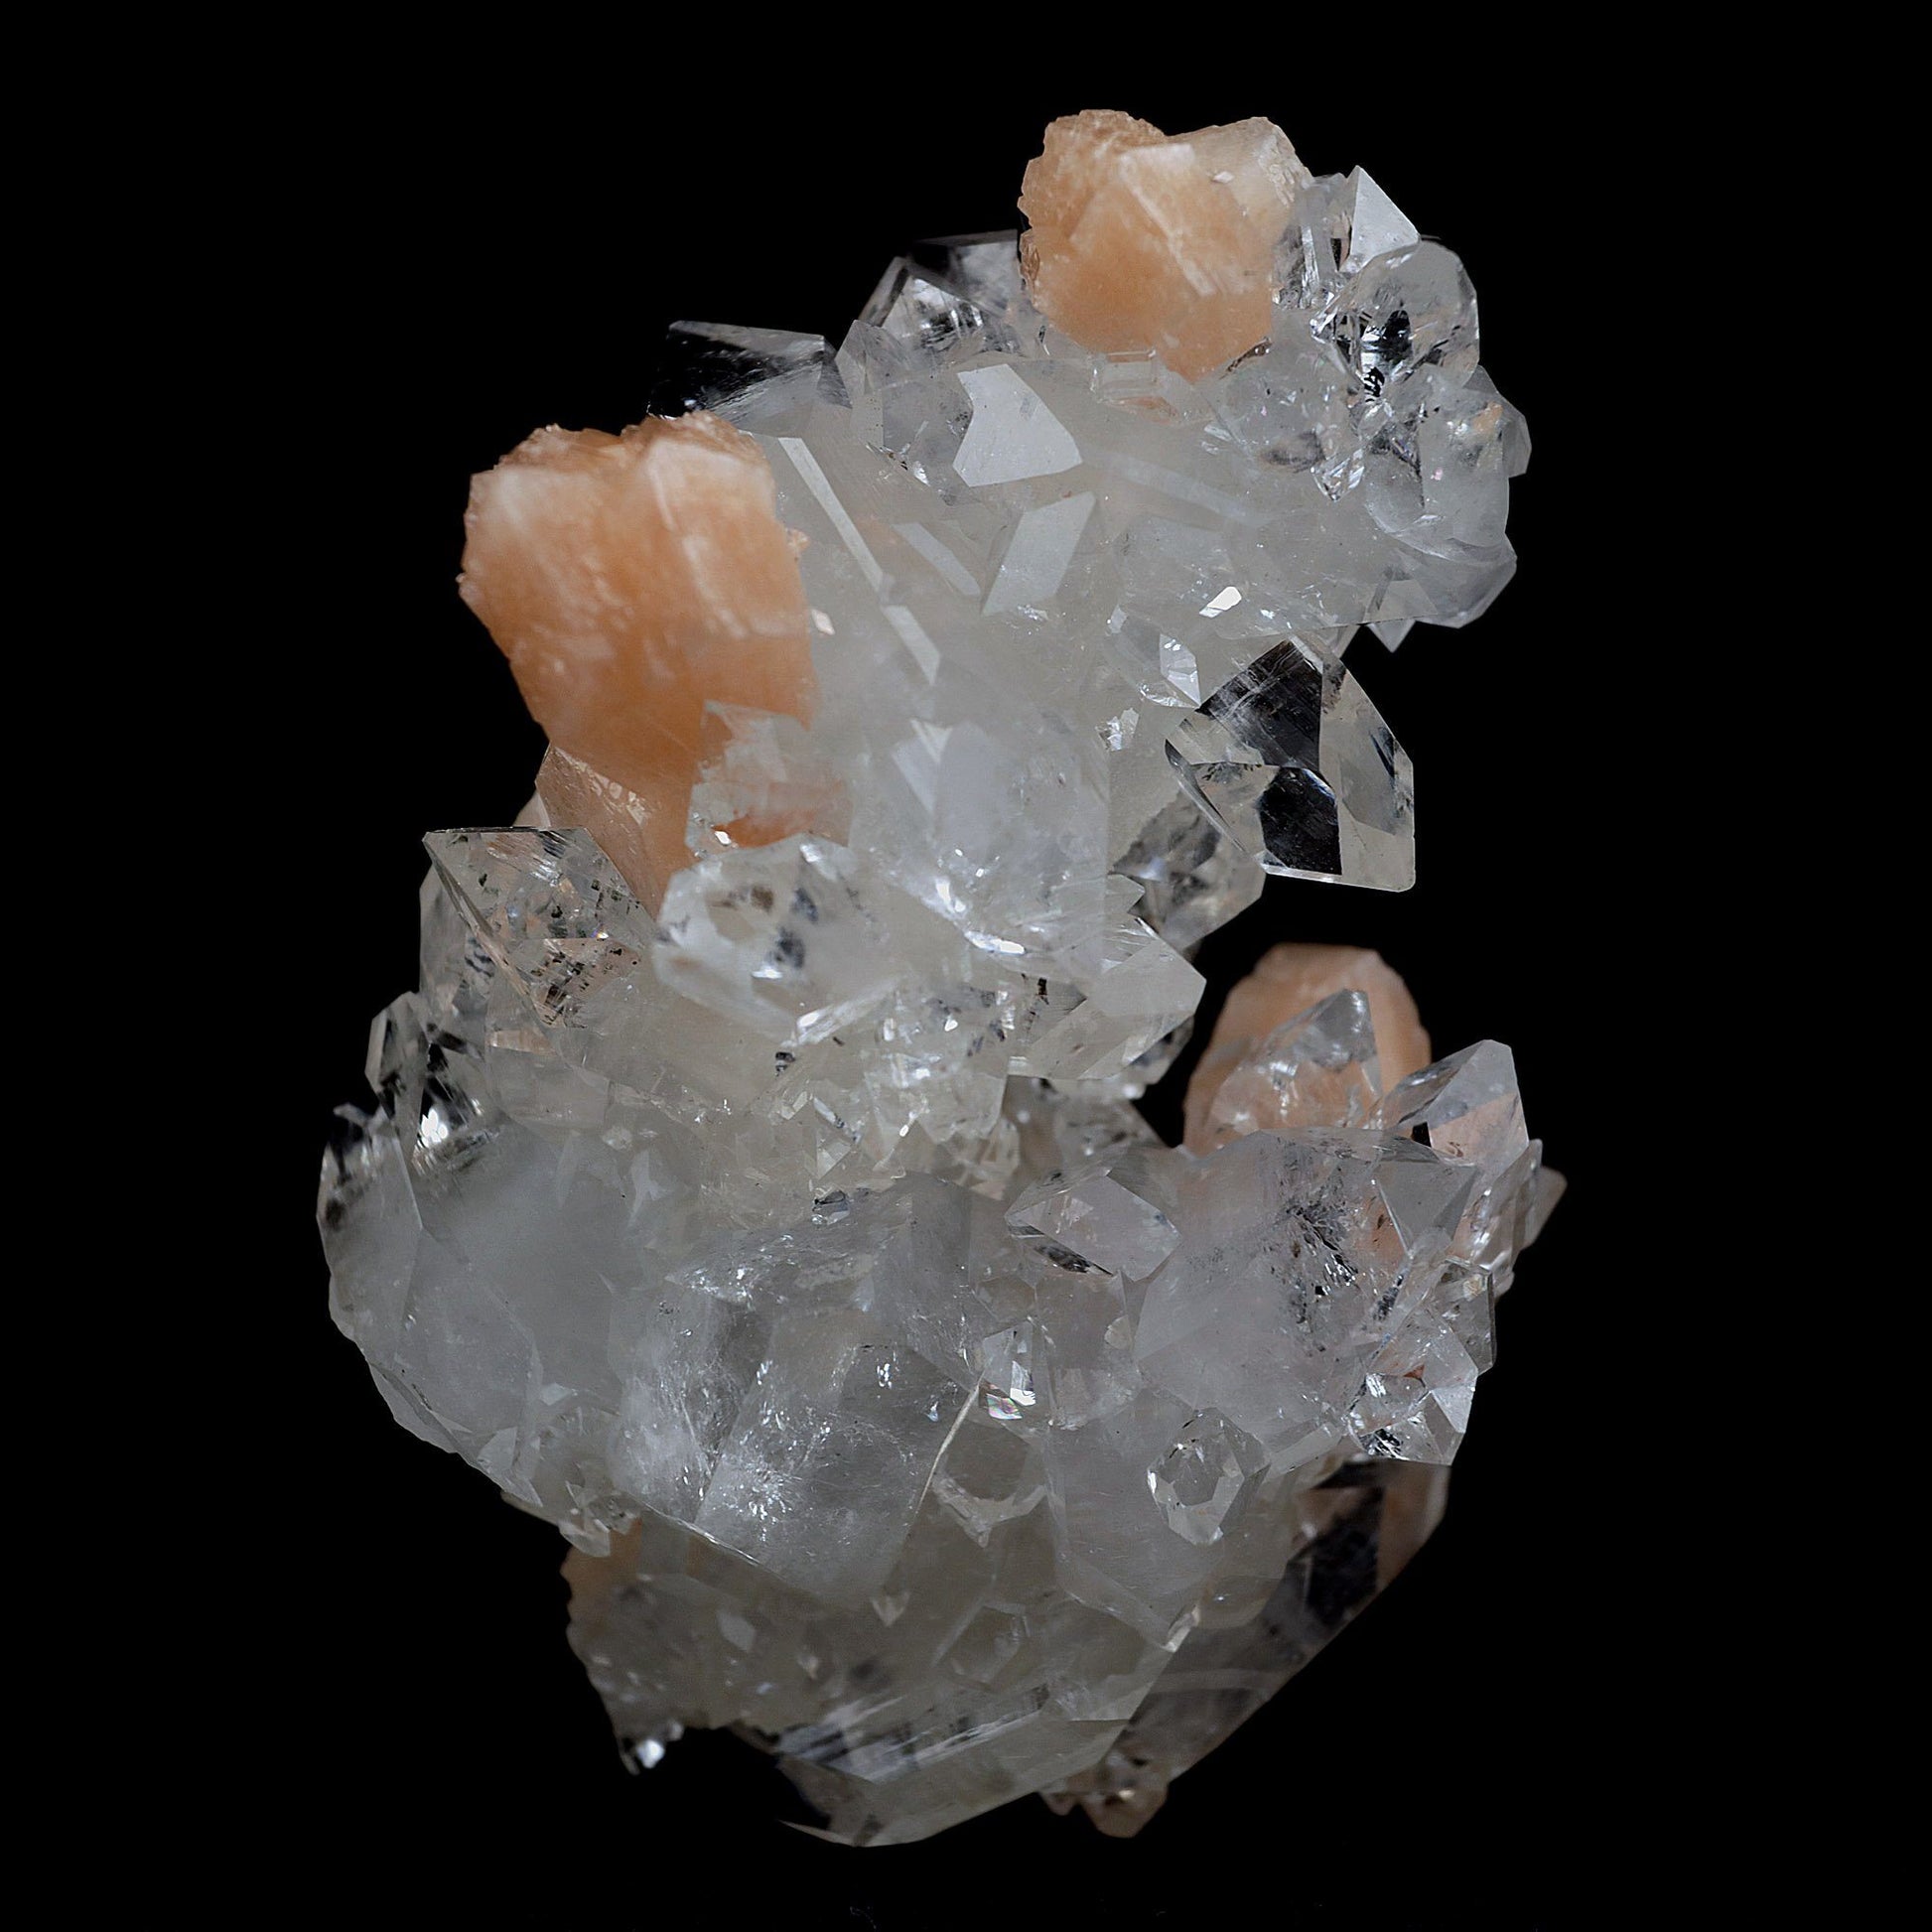 Apophyllite Gemmy Crystals with Stilbite Natural Mineral Specimen # B …  https://www.superbminerals.us/products/apophyllite-gemmy-crystals-with-stilbite-natural-mineral-specimen-b-4057  Features:Very fine classic Apophyllite specimen with Stilbite on Quartz from the Jalgaon area Deccan Trap flood Basalts. Sharply formed crystals of Apophyllite, displaying strong development of prism and pyramidal faces. Crystals of Apophyllite have pleasing colourless gemmy pyramidal areas, and translucent prism